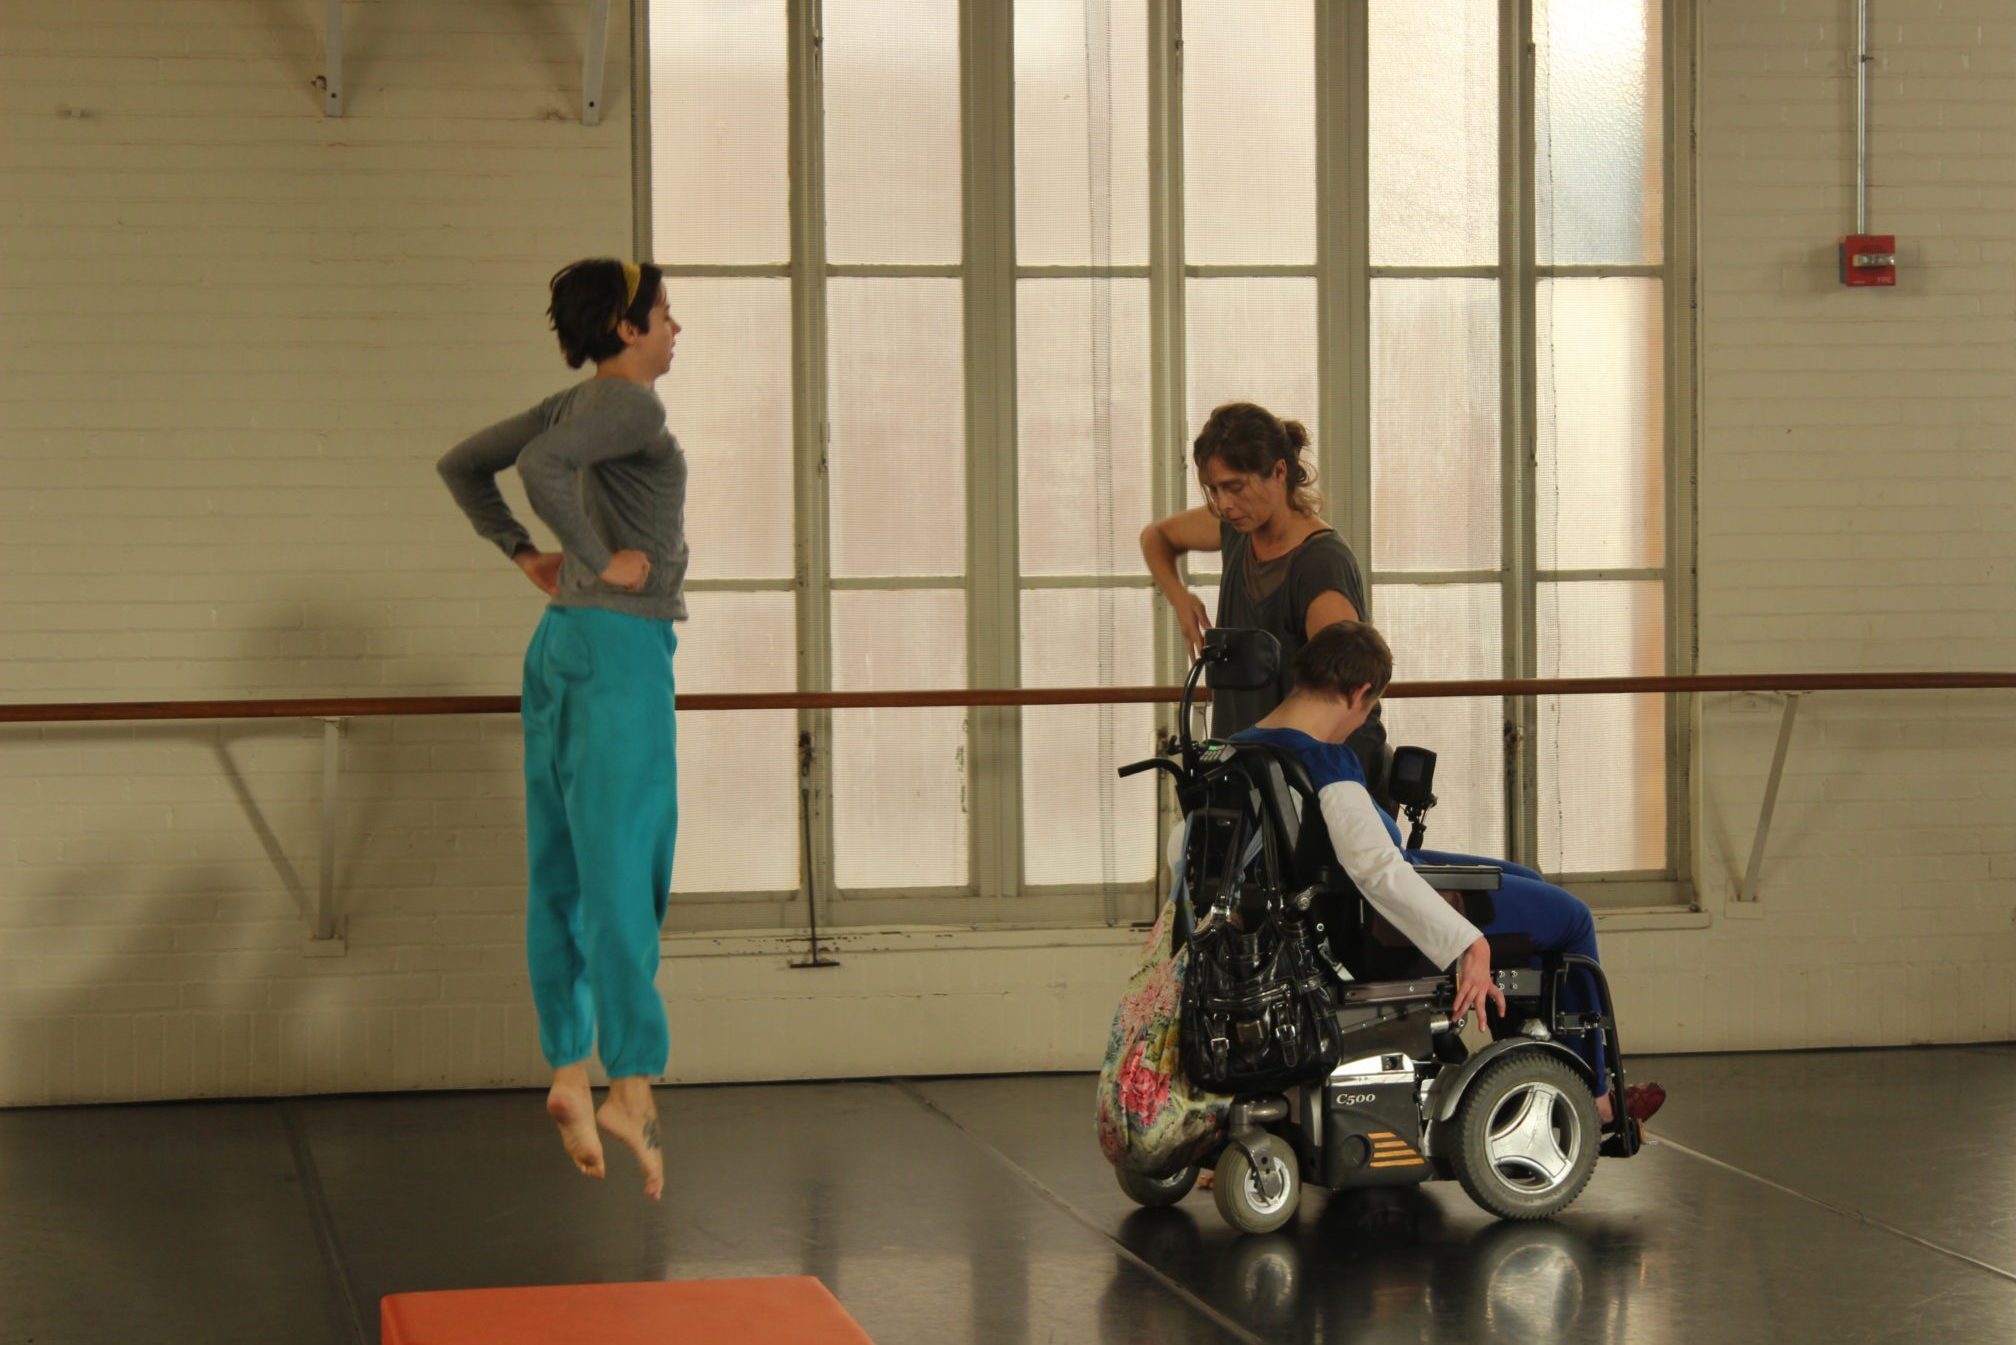 three dancers with and without disabilities practice in a studio space. One dancer is leaping into the air.